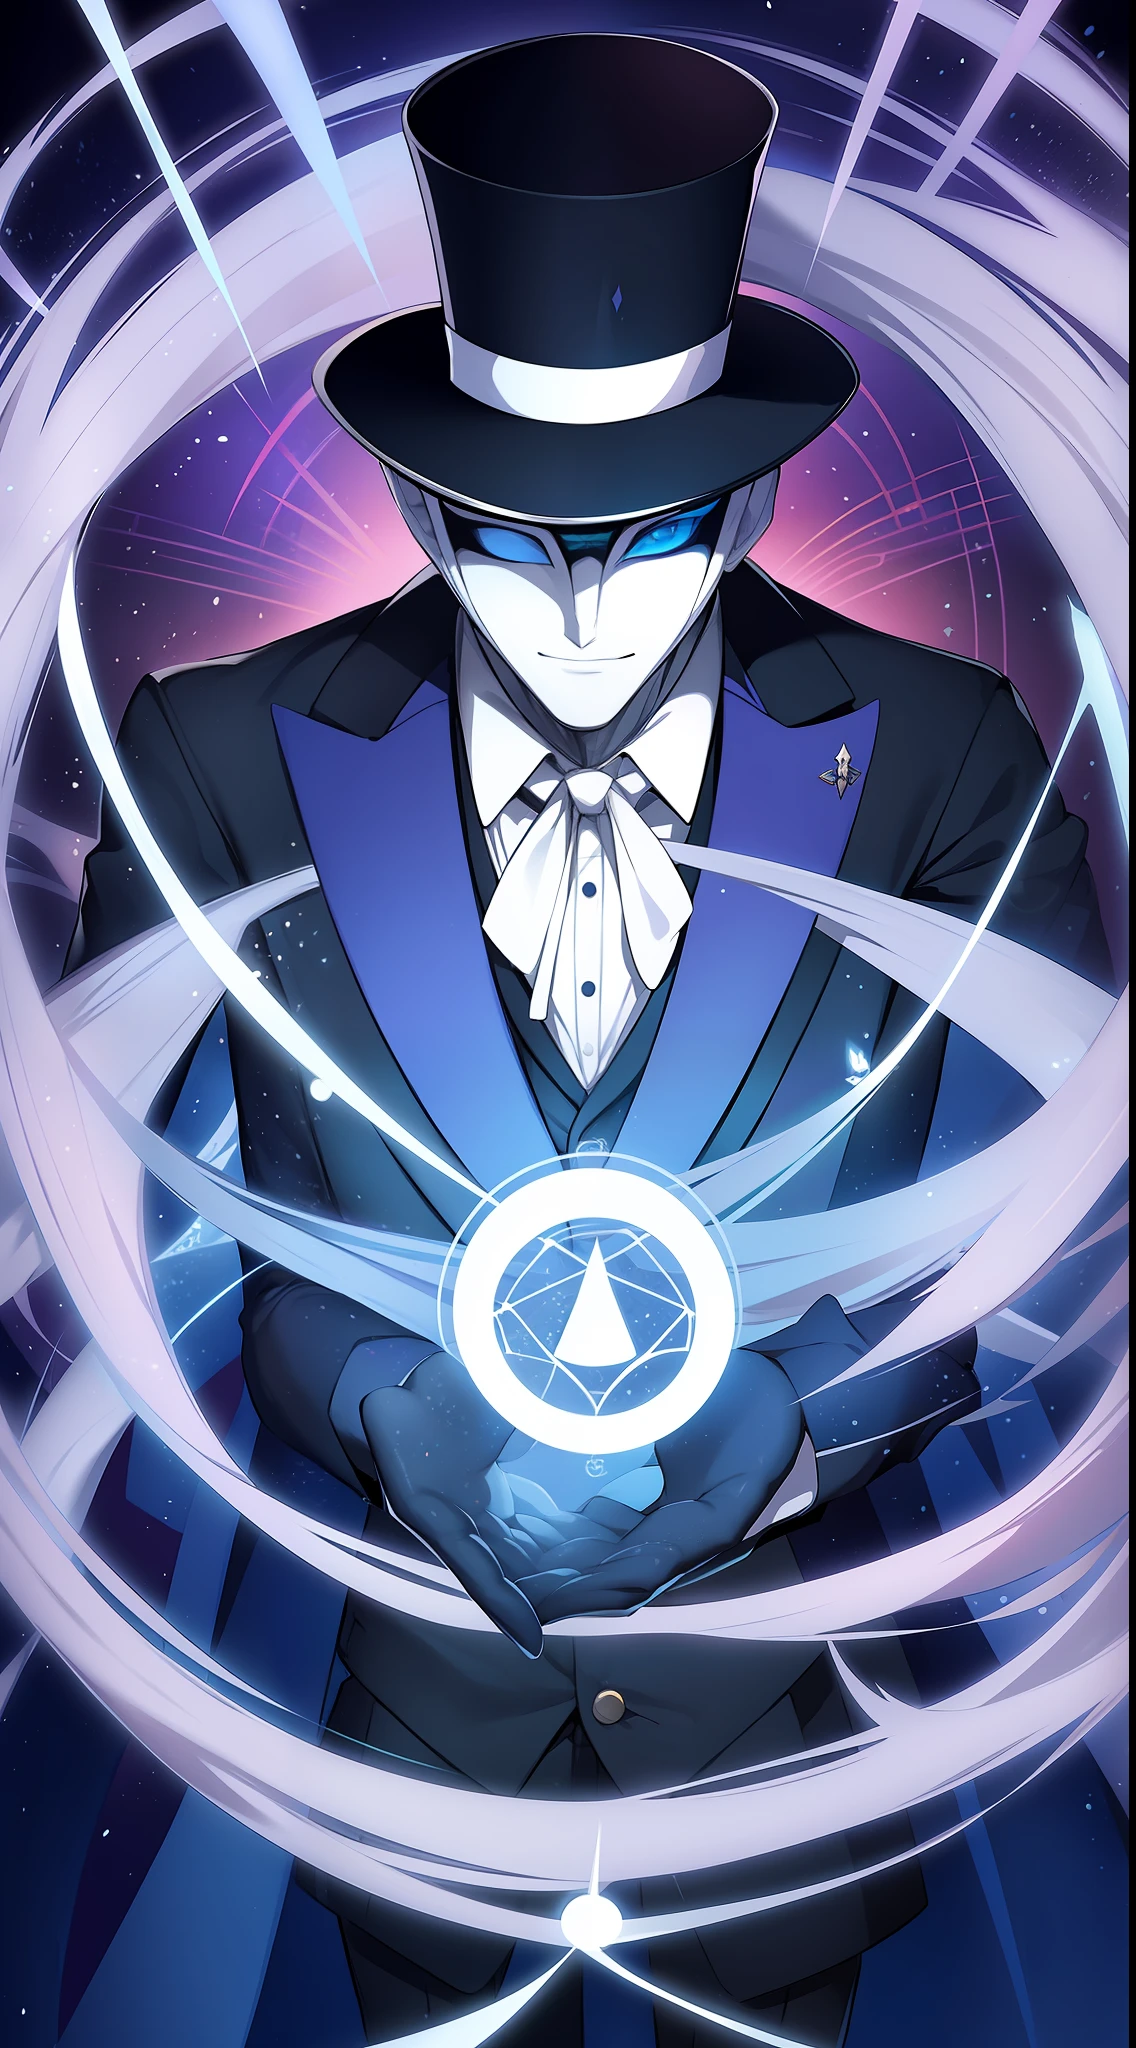 a magic wearing a suit and a top hat using a white マスク with floating tarot cards surrounding him, マスク with a hand drawing, マスク, マスクed, マスク hiding all the face